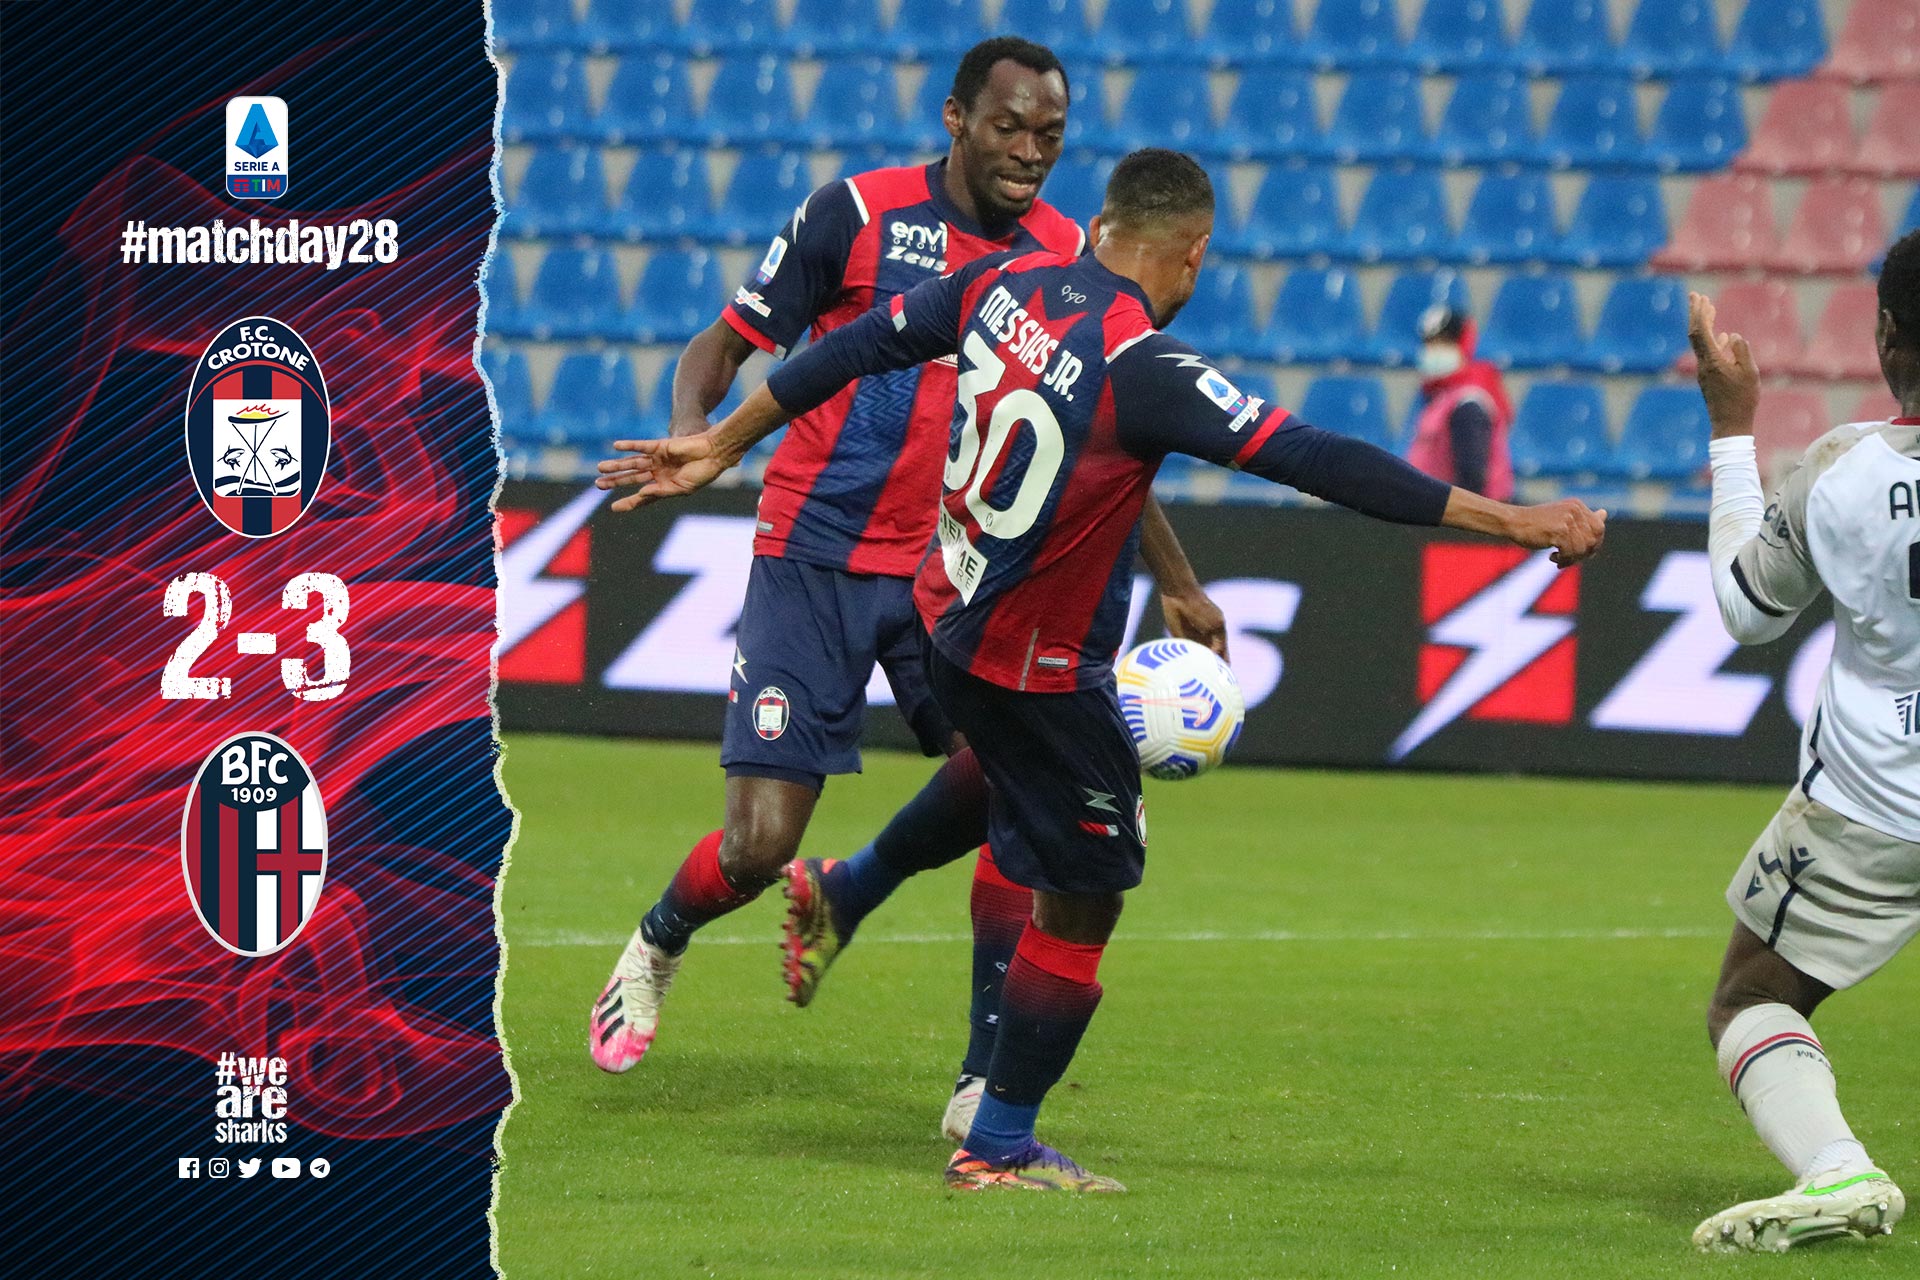 Serie A: Simy Nwankwo On Target In Crotone’s Home Defeat Vs Bologna